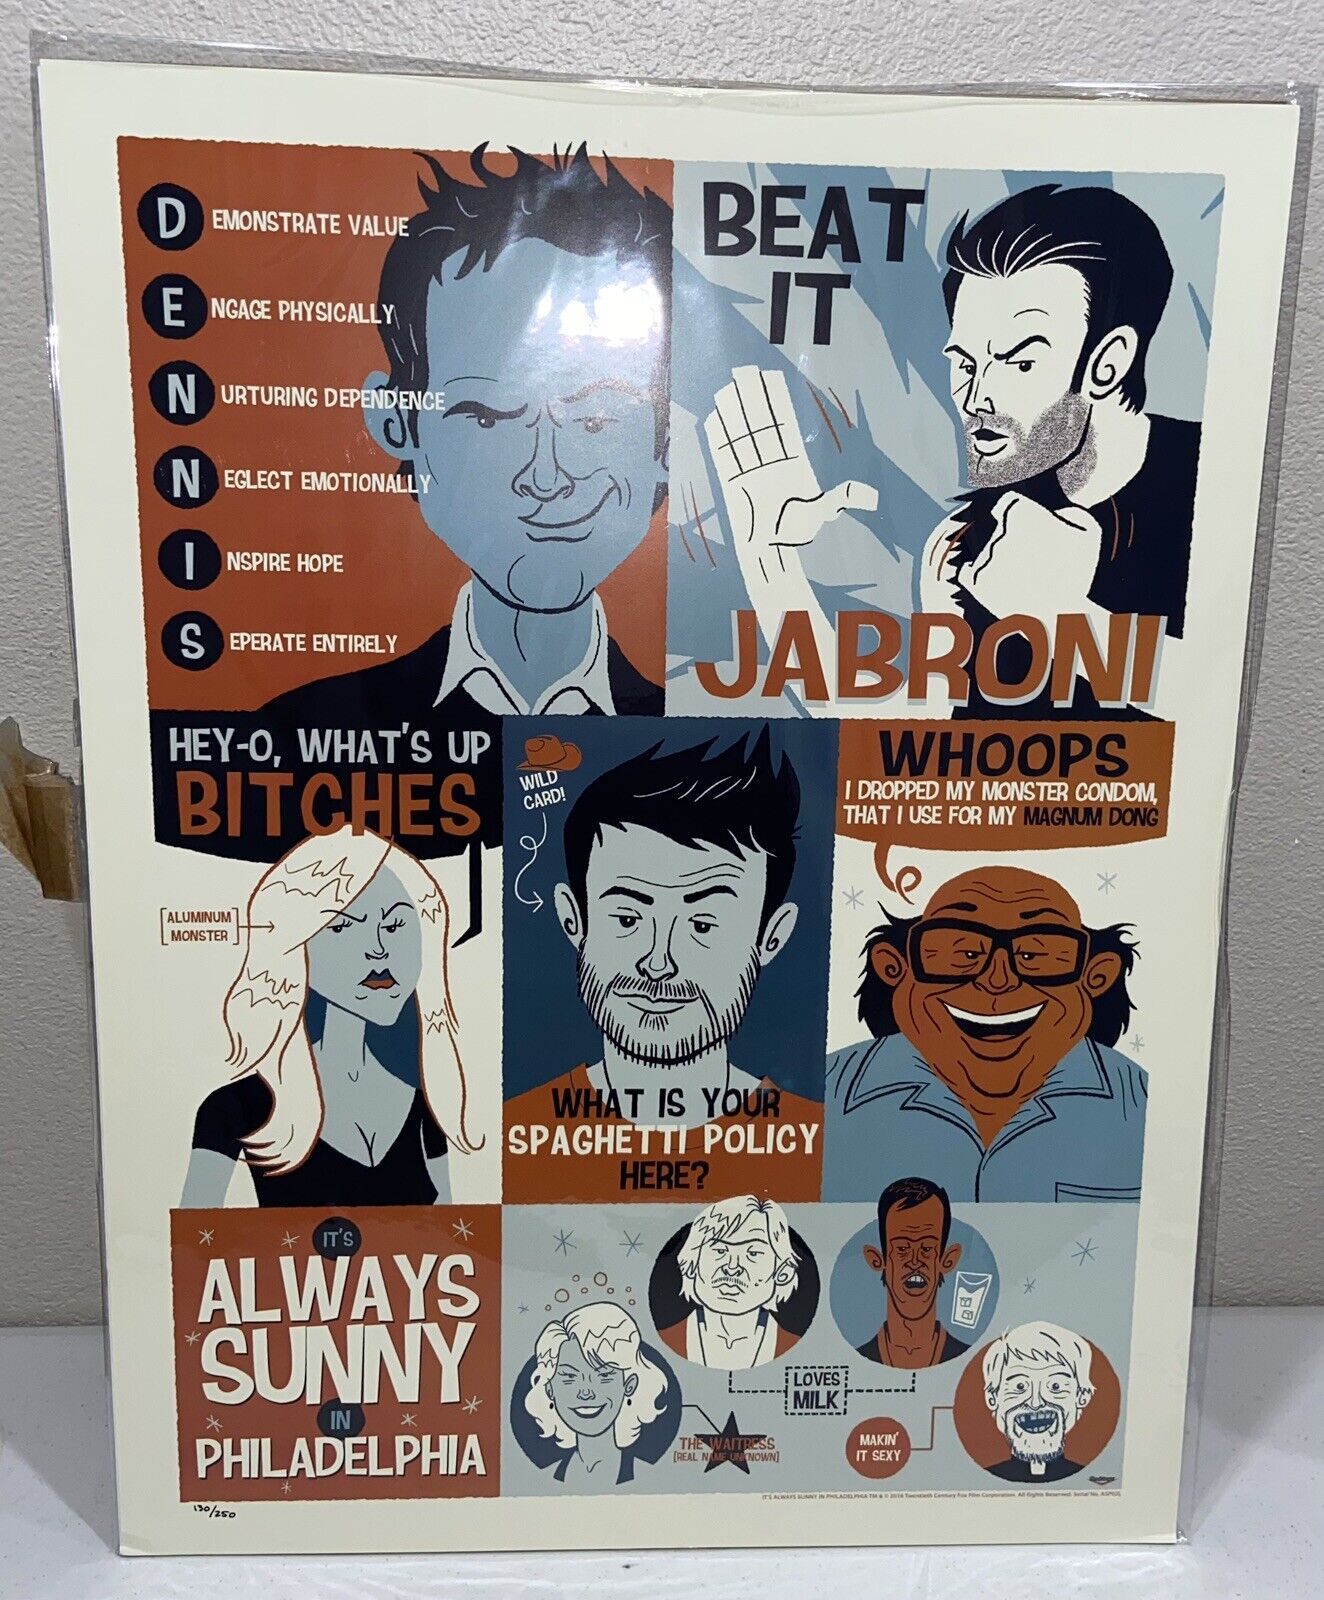 It’s Always Sunny in Philadelphia Television Series Art 18x24  Lithograph /250